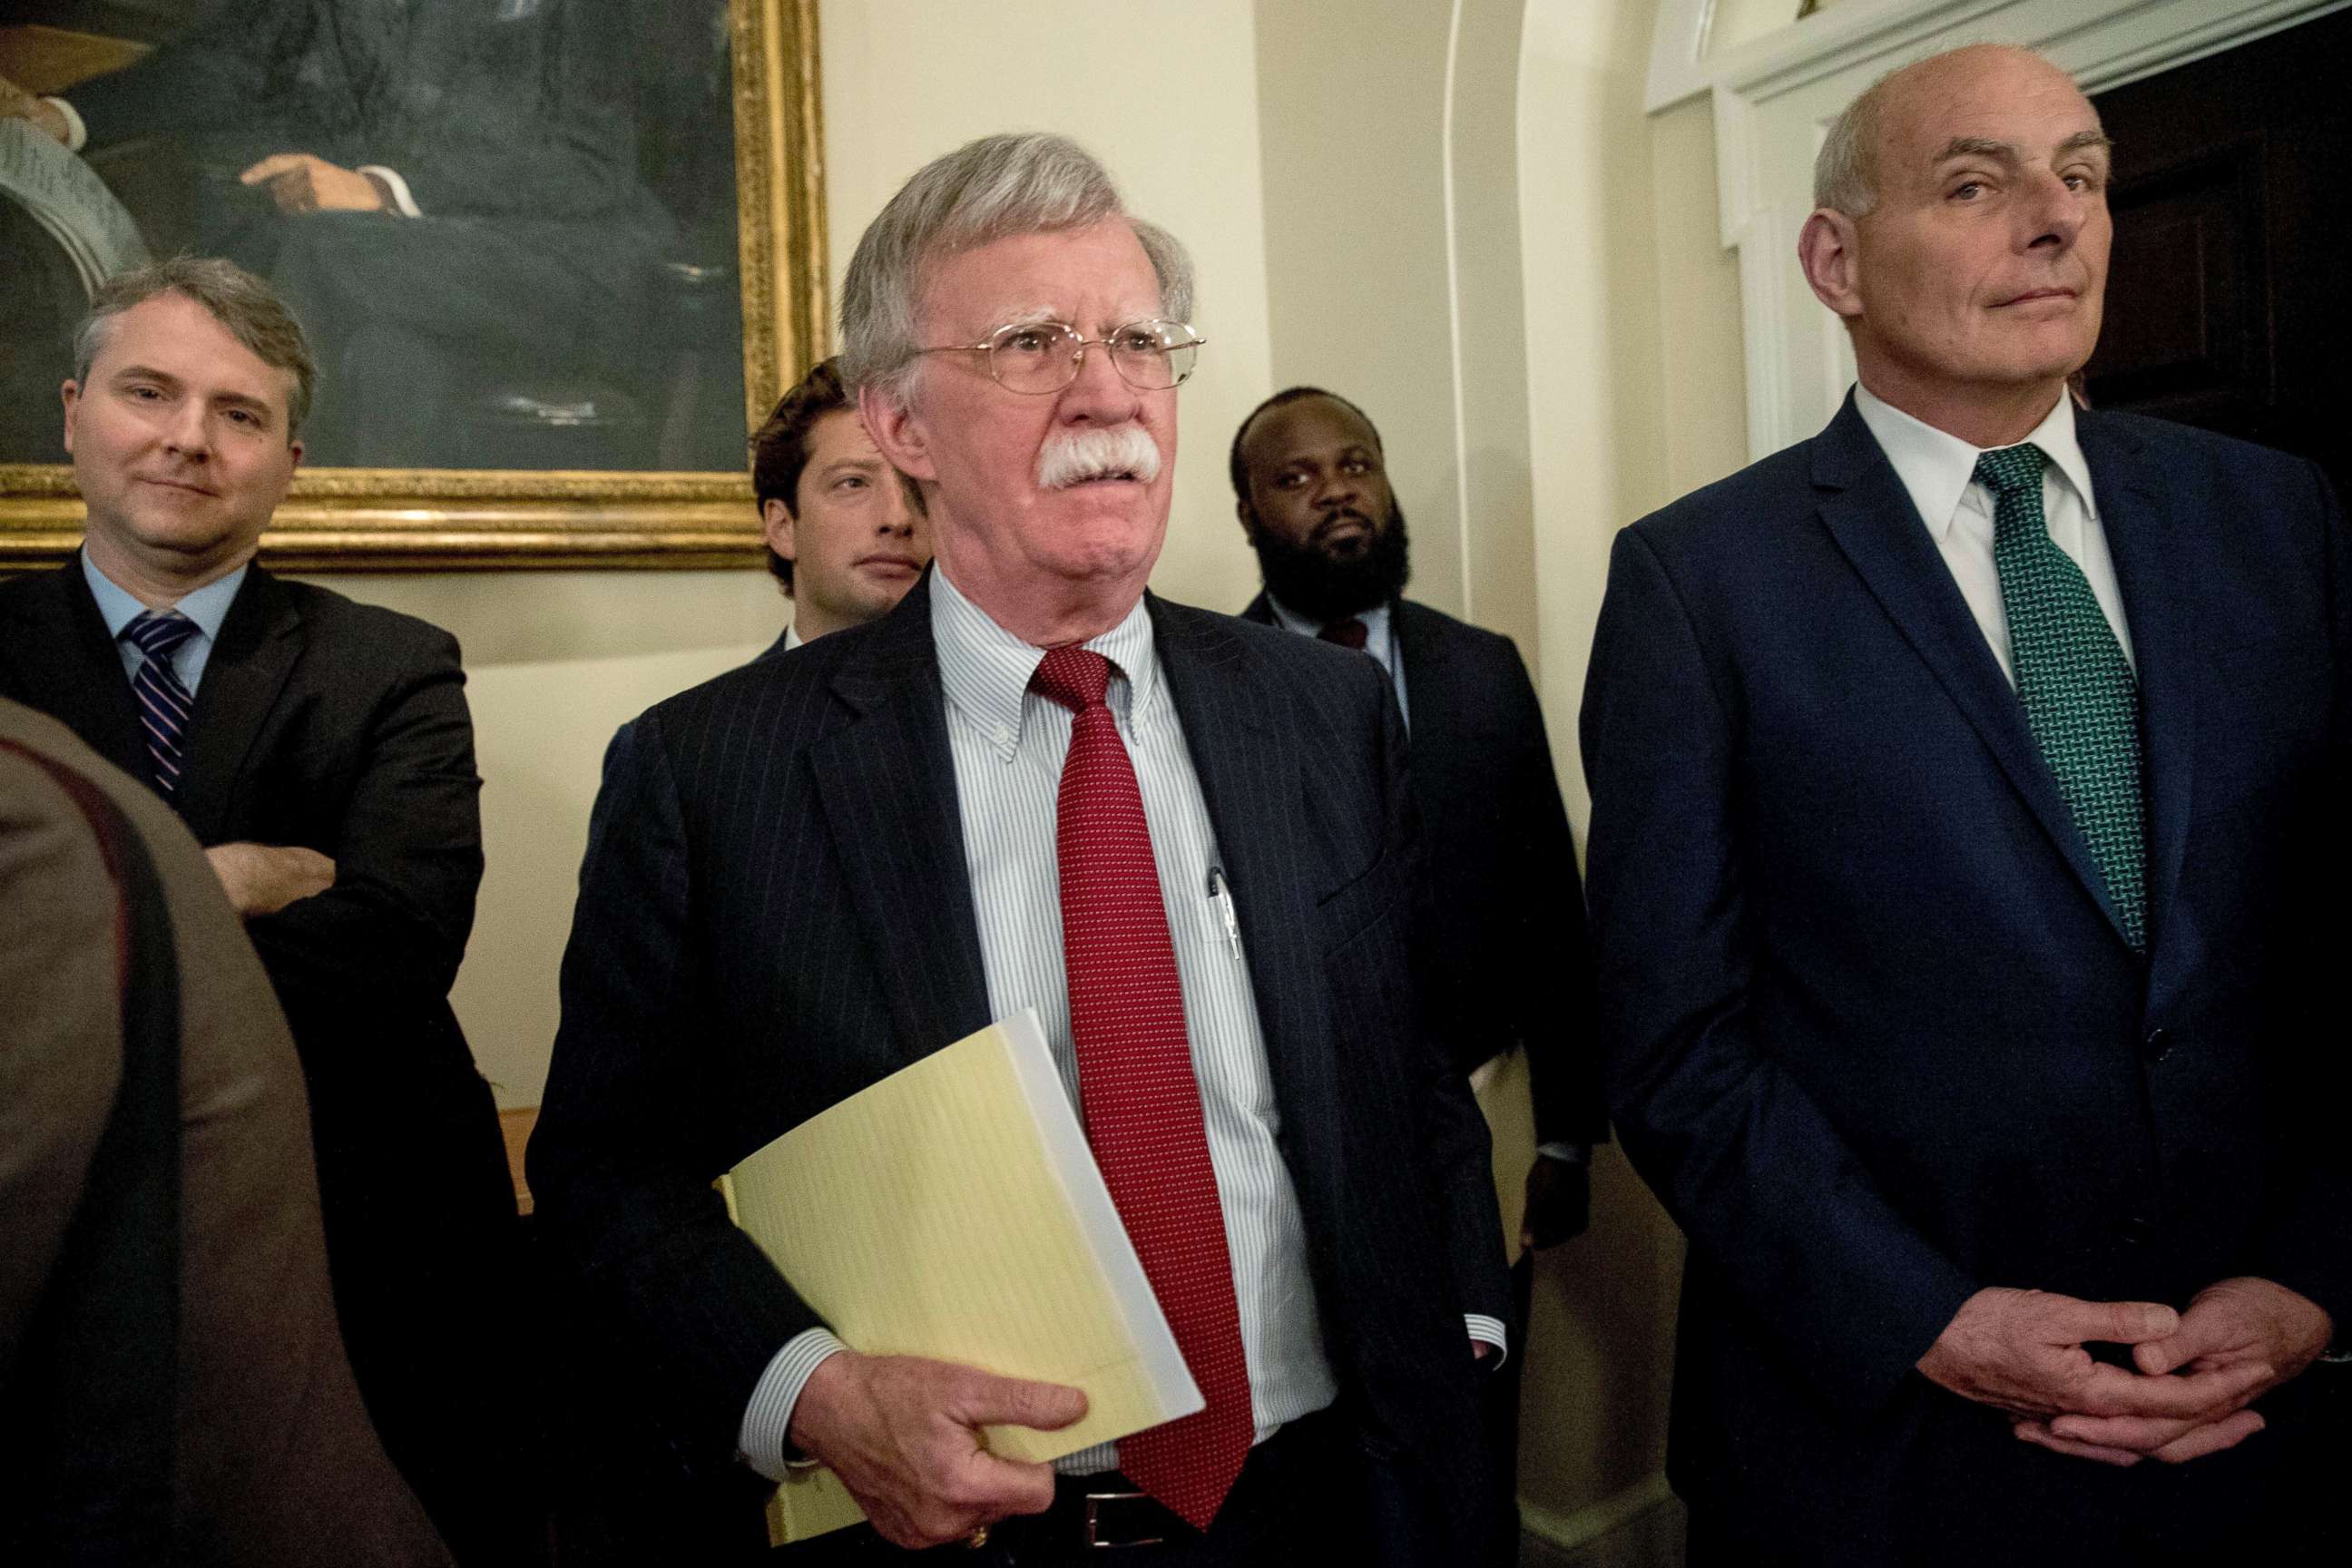 PHOTO: National security adviser John Bolton, center, and President Donald Trump's chief of staff John Kelly, right, attend a meeting with President Donald Trump and members of Congress in the Cabinet Room of the White House, July 17, 2018, in Washington.